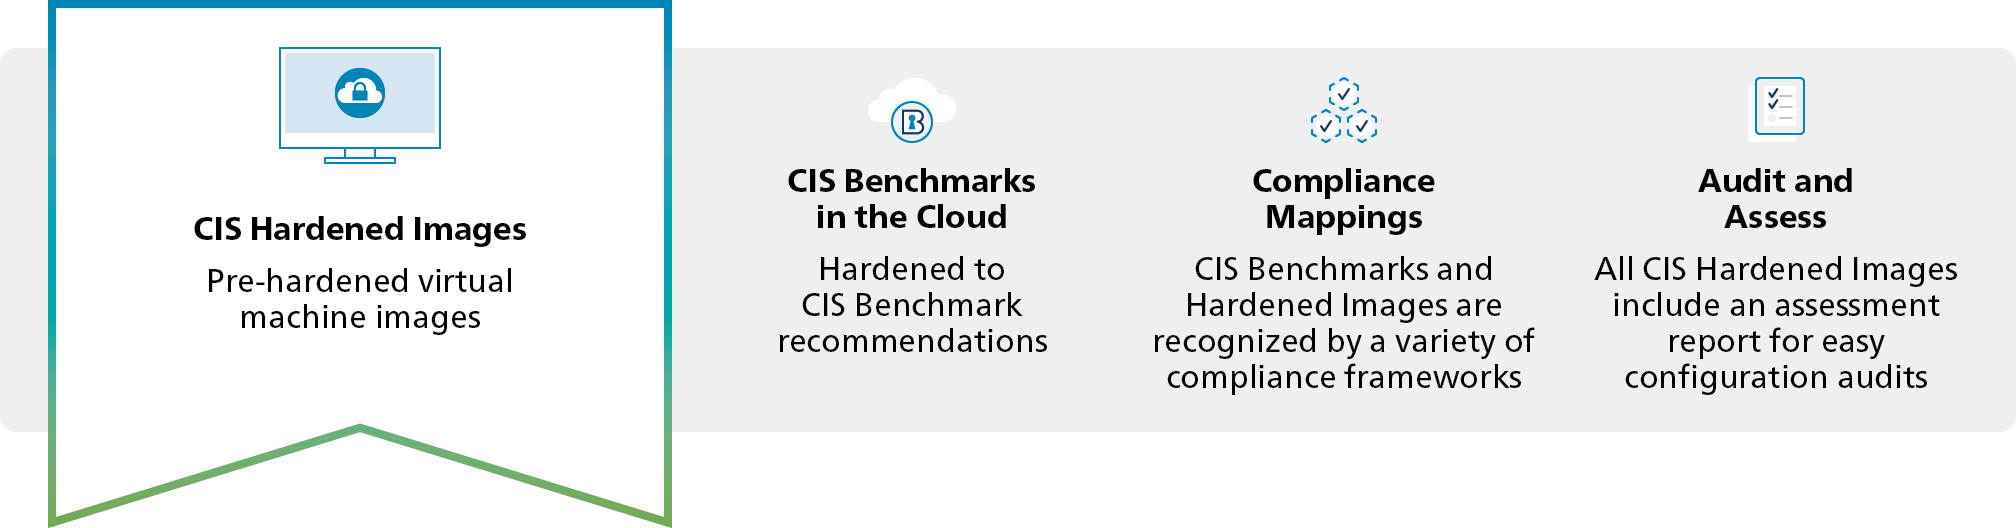 CIS-Hardened_Images-Products_and_Services.png